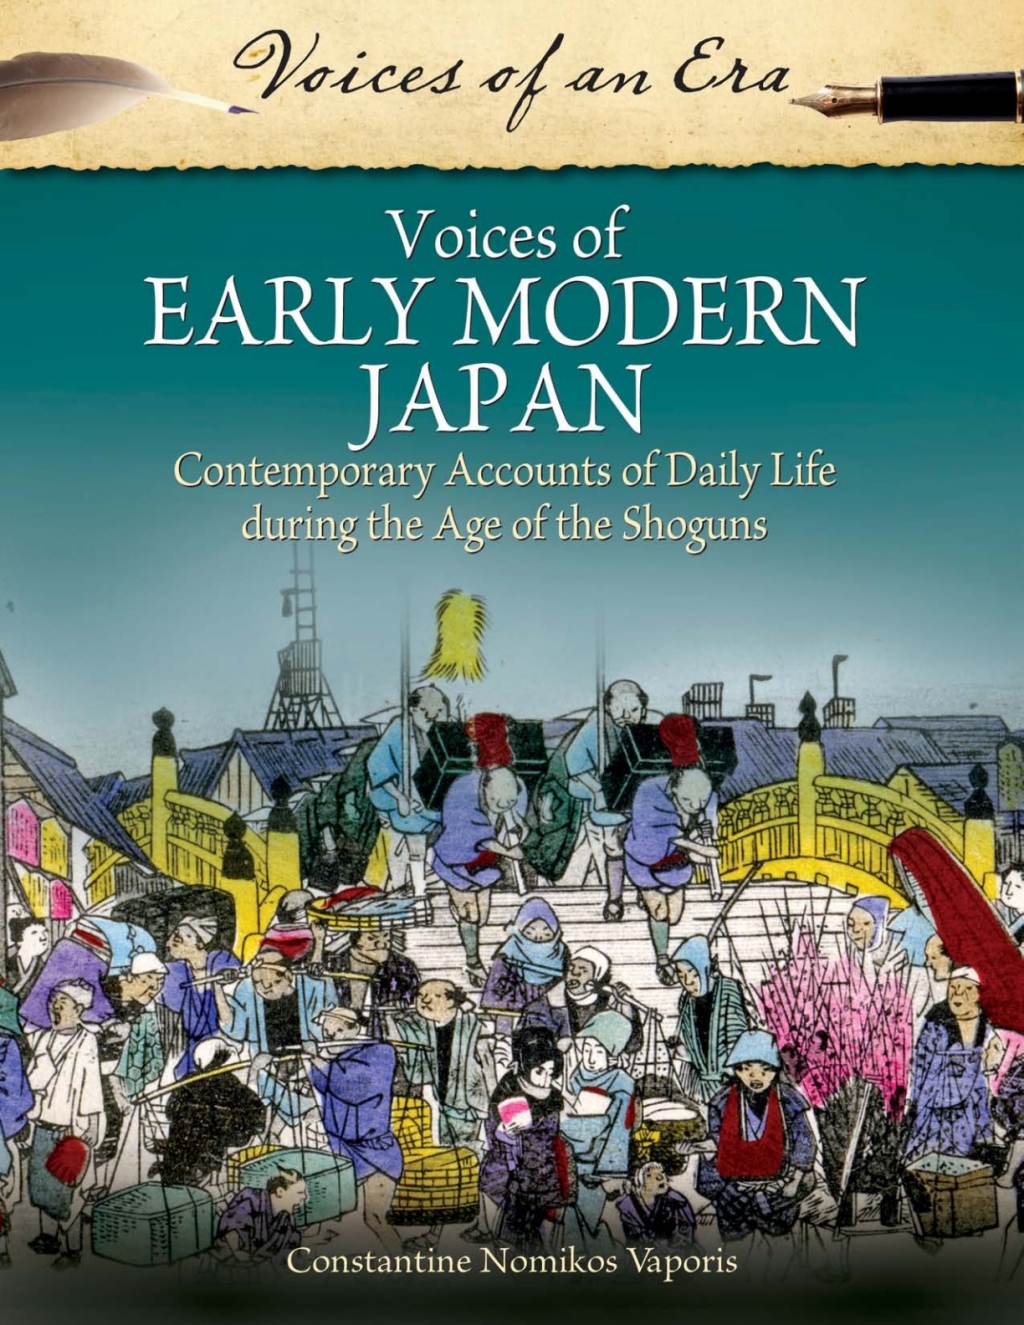 Voices of Early Modern Japan: Contemporary Accounts of Daily Life During the Age of the Shoguns (eBook Rental) - Constantine Nomikos Vaporis Ph.D.,